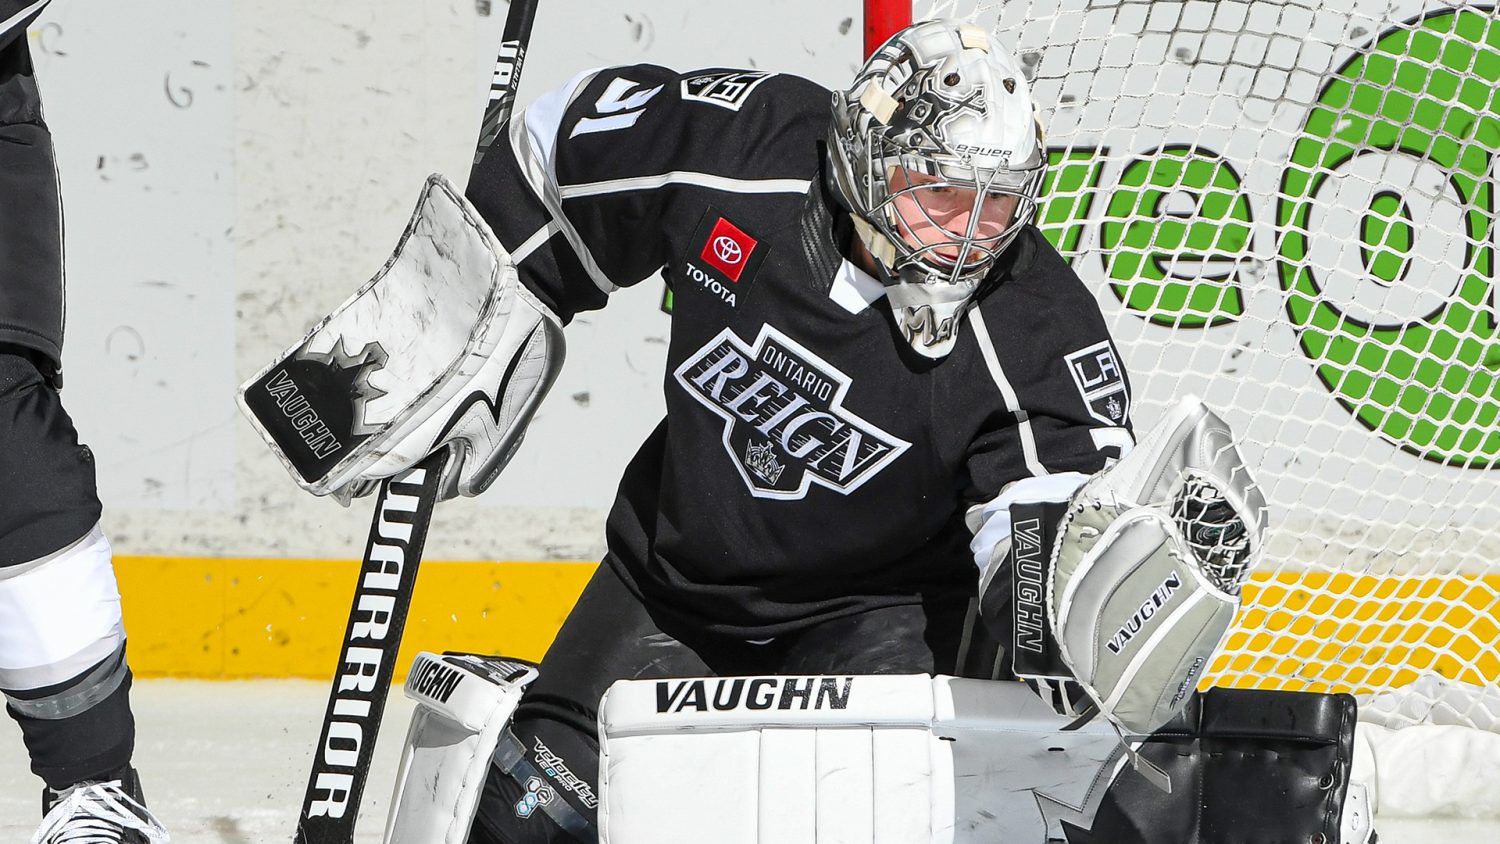 New jerseys, new mission for Ontario Reign - LA Kings Insider